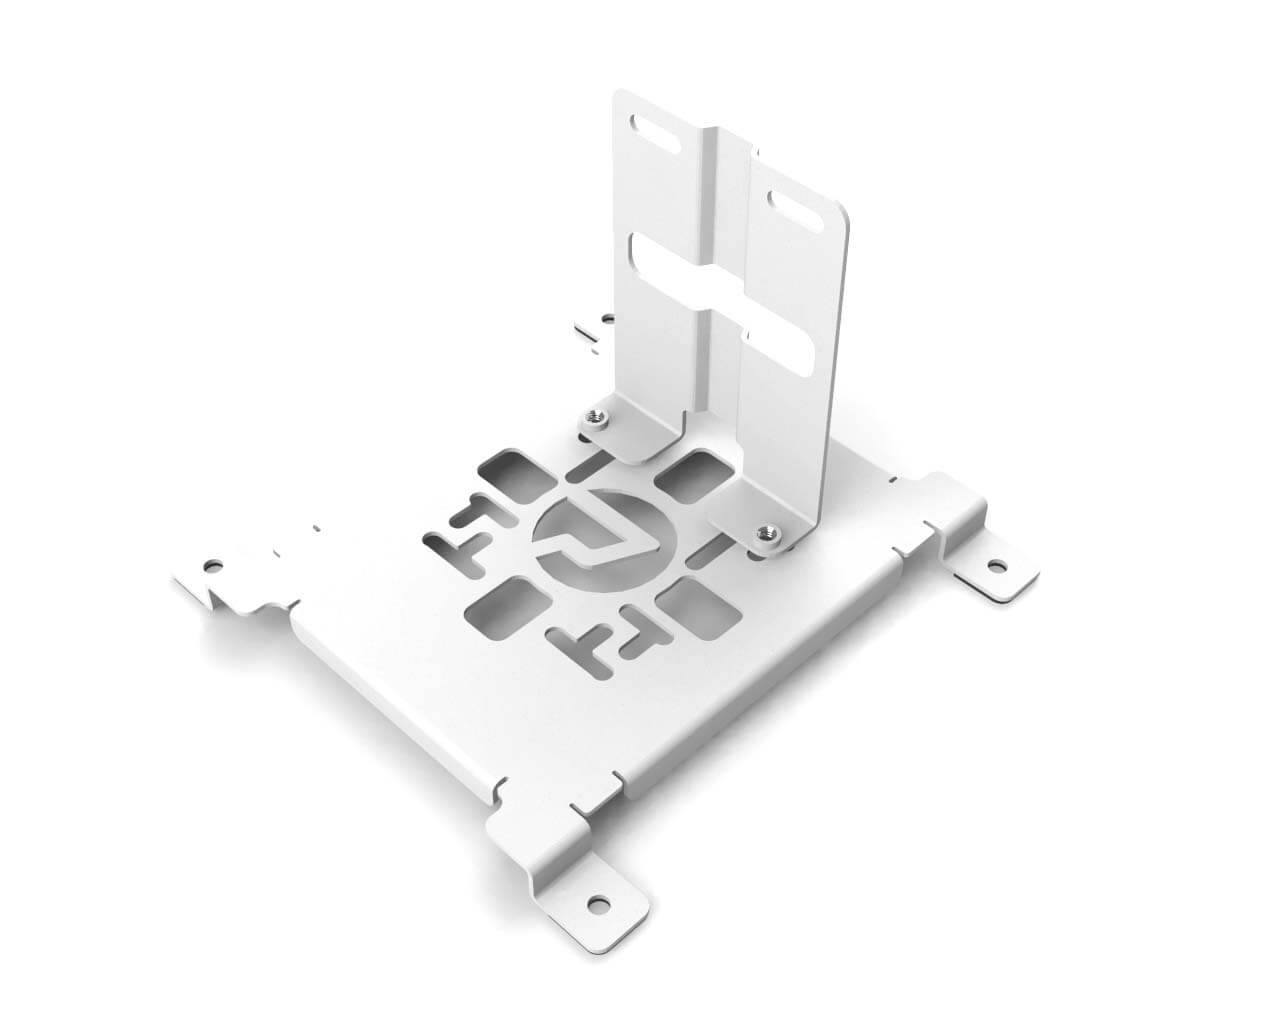 PrimoChill SX CTR2 Spider Mount Bracket Kit - 140mm Series - PrimoChill - KEEPING IT COOL Sky White